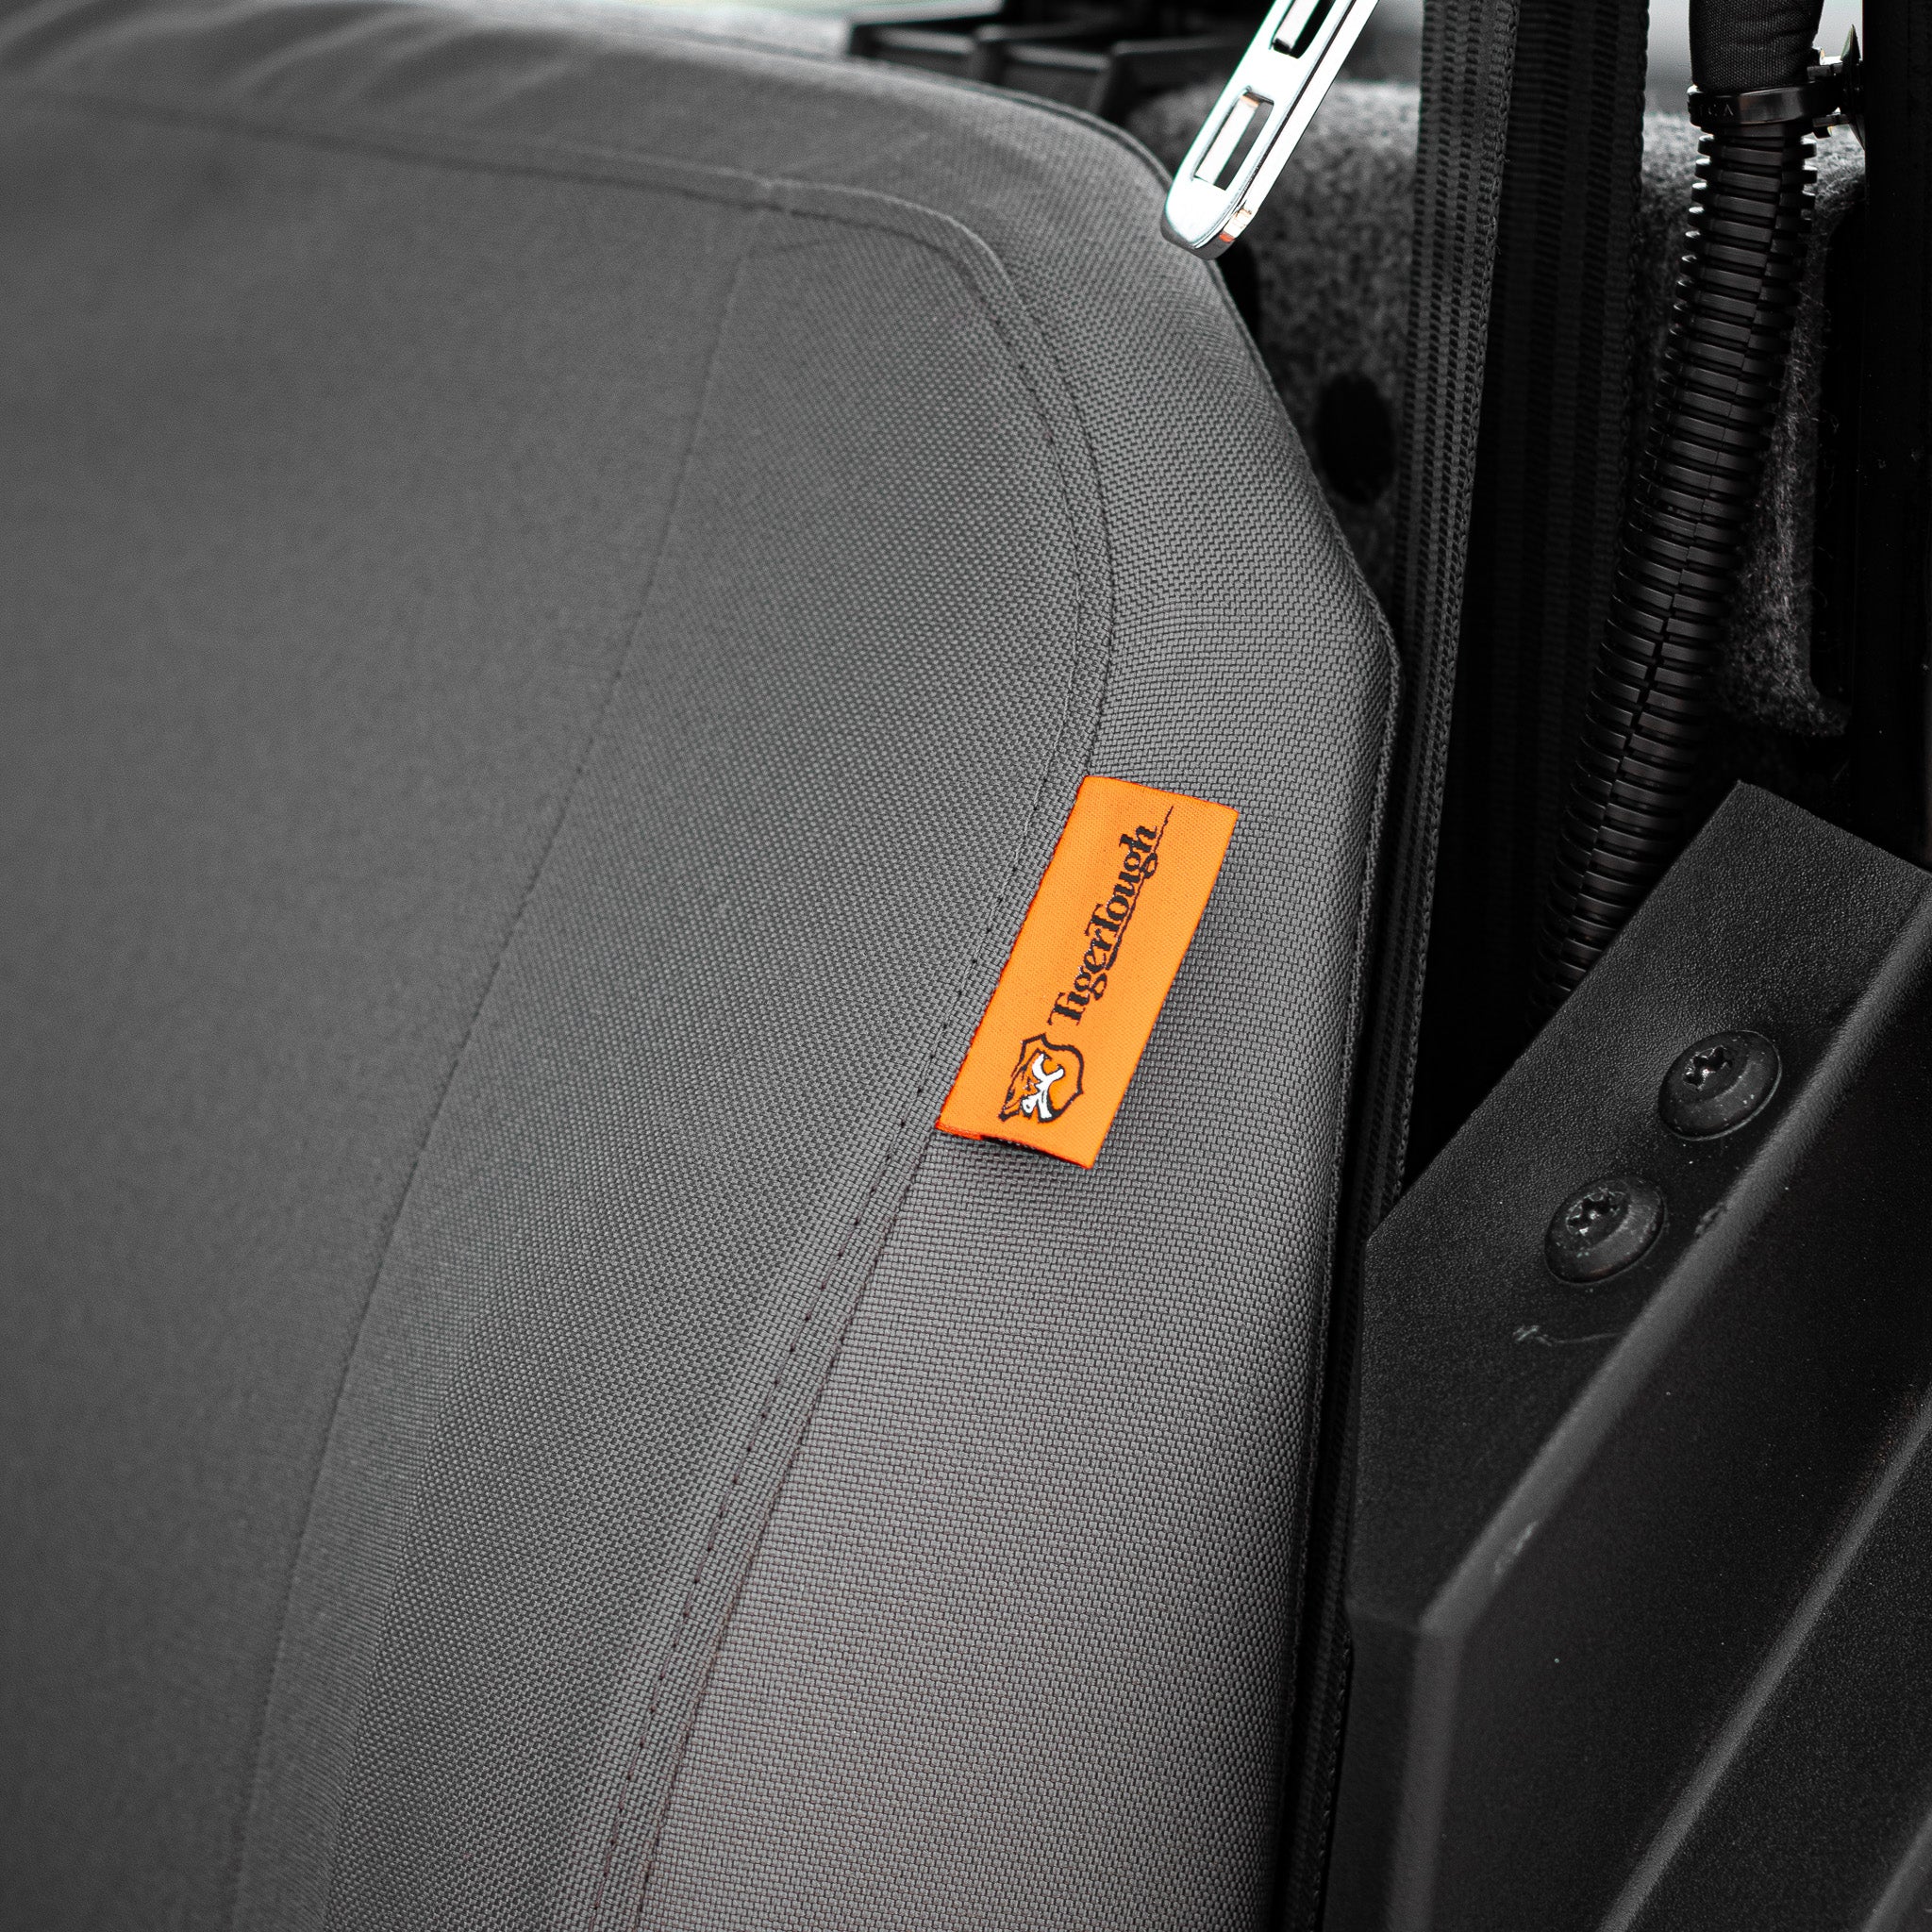 A close-up of the TigerTough tag on the side of the seat cover. 